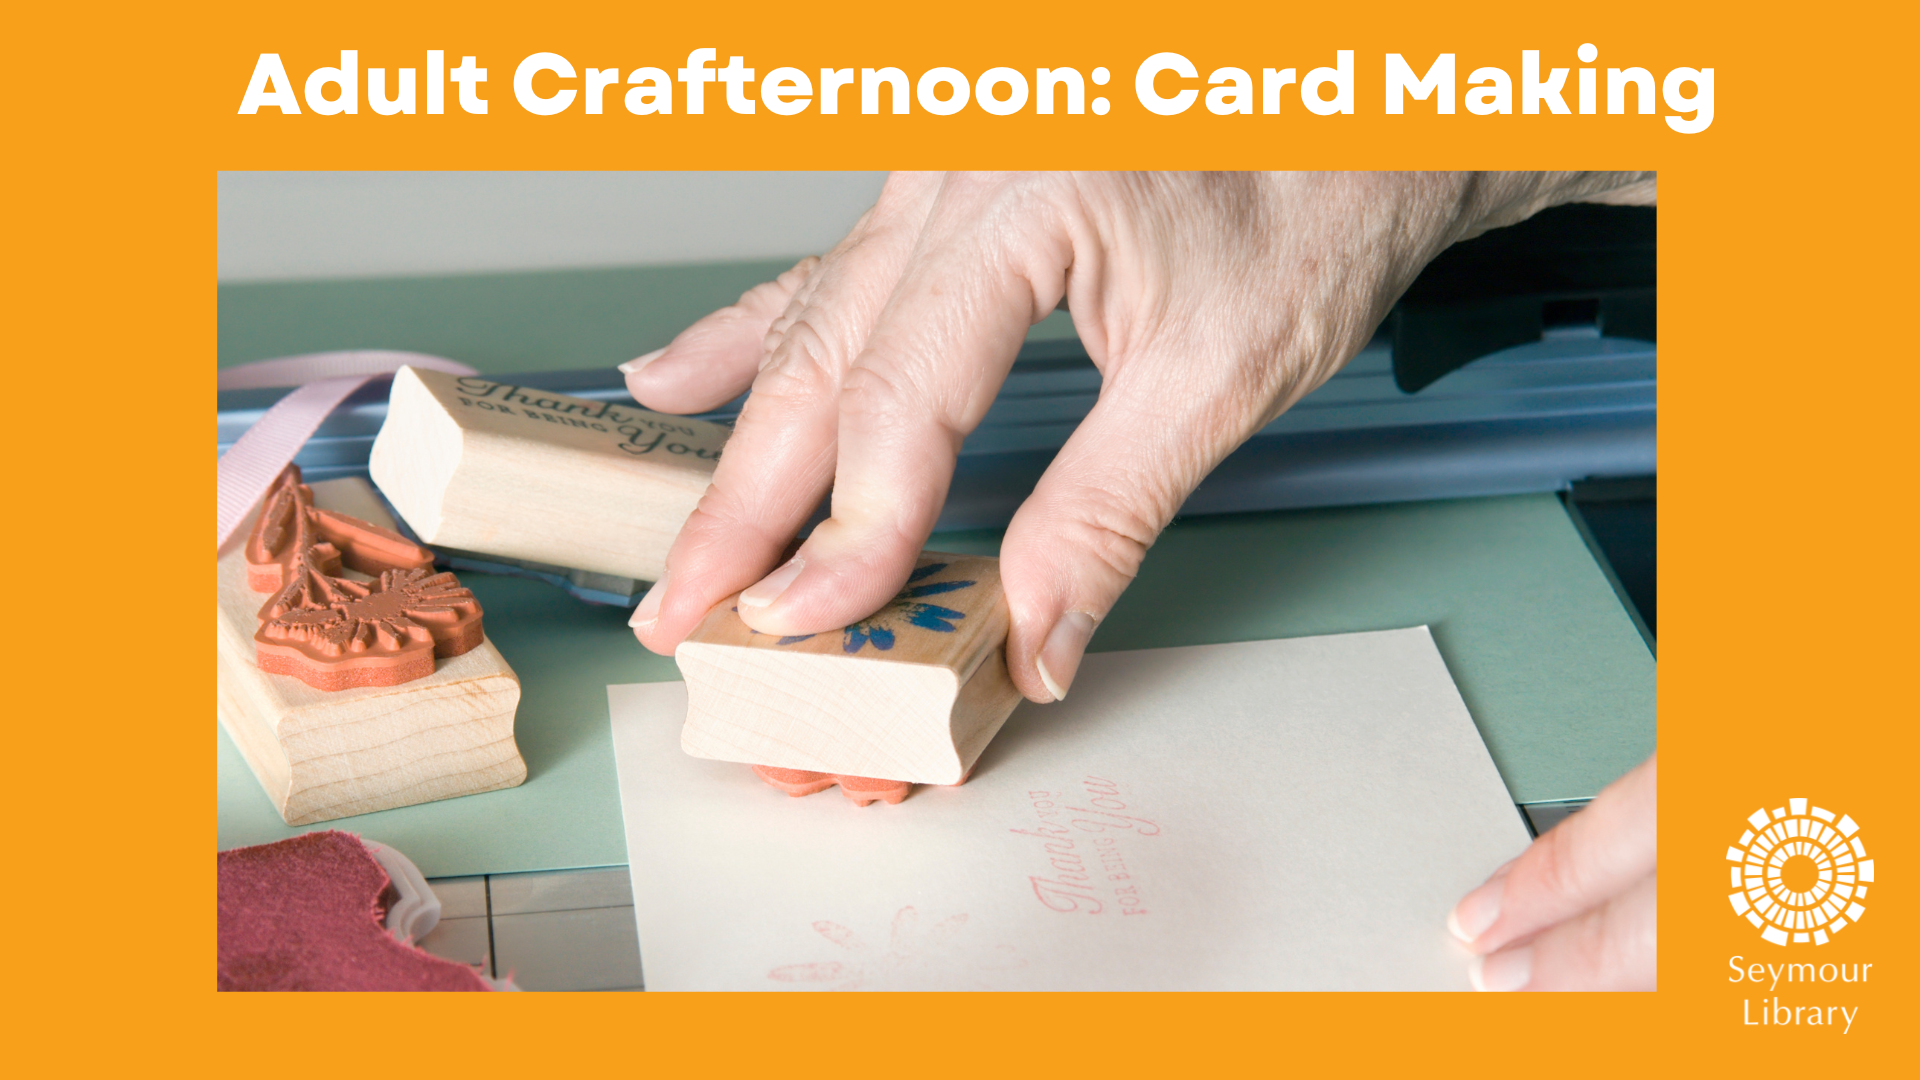 Adult Crafternoon: Card Making - pic of person using stamps to create a thank you card.